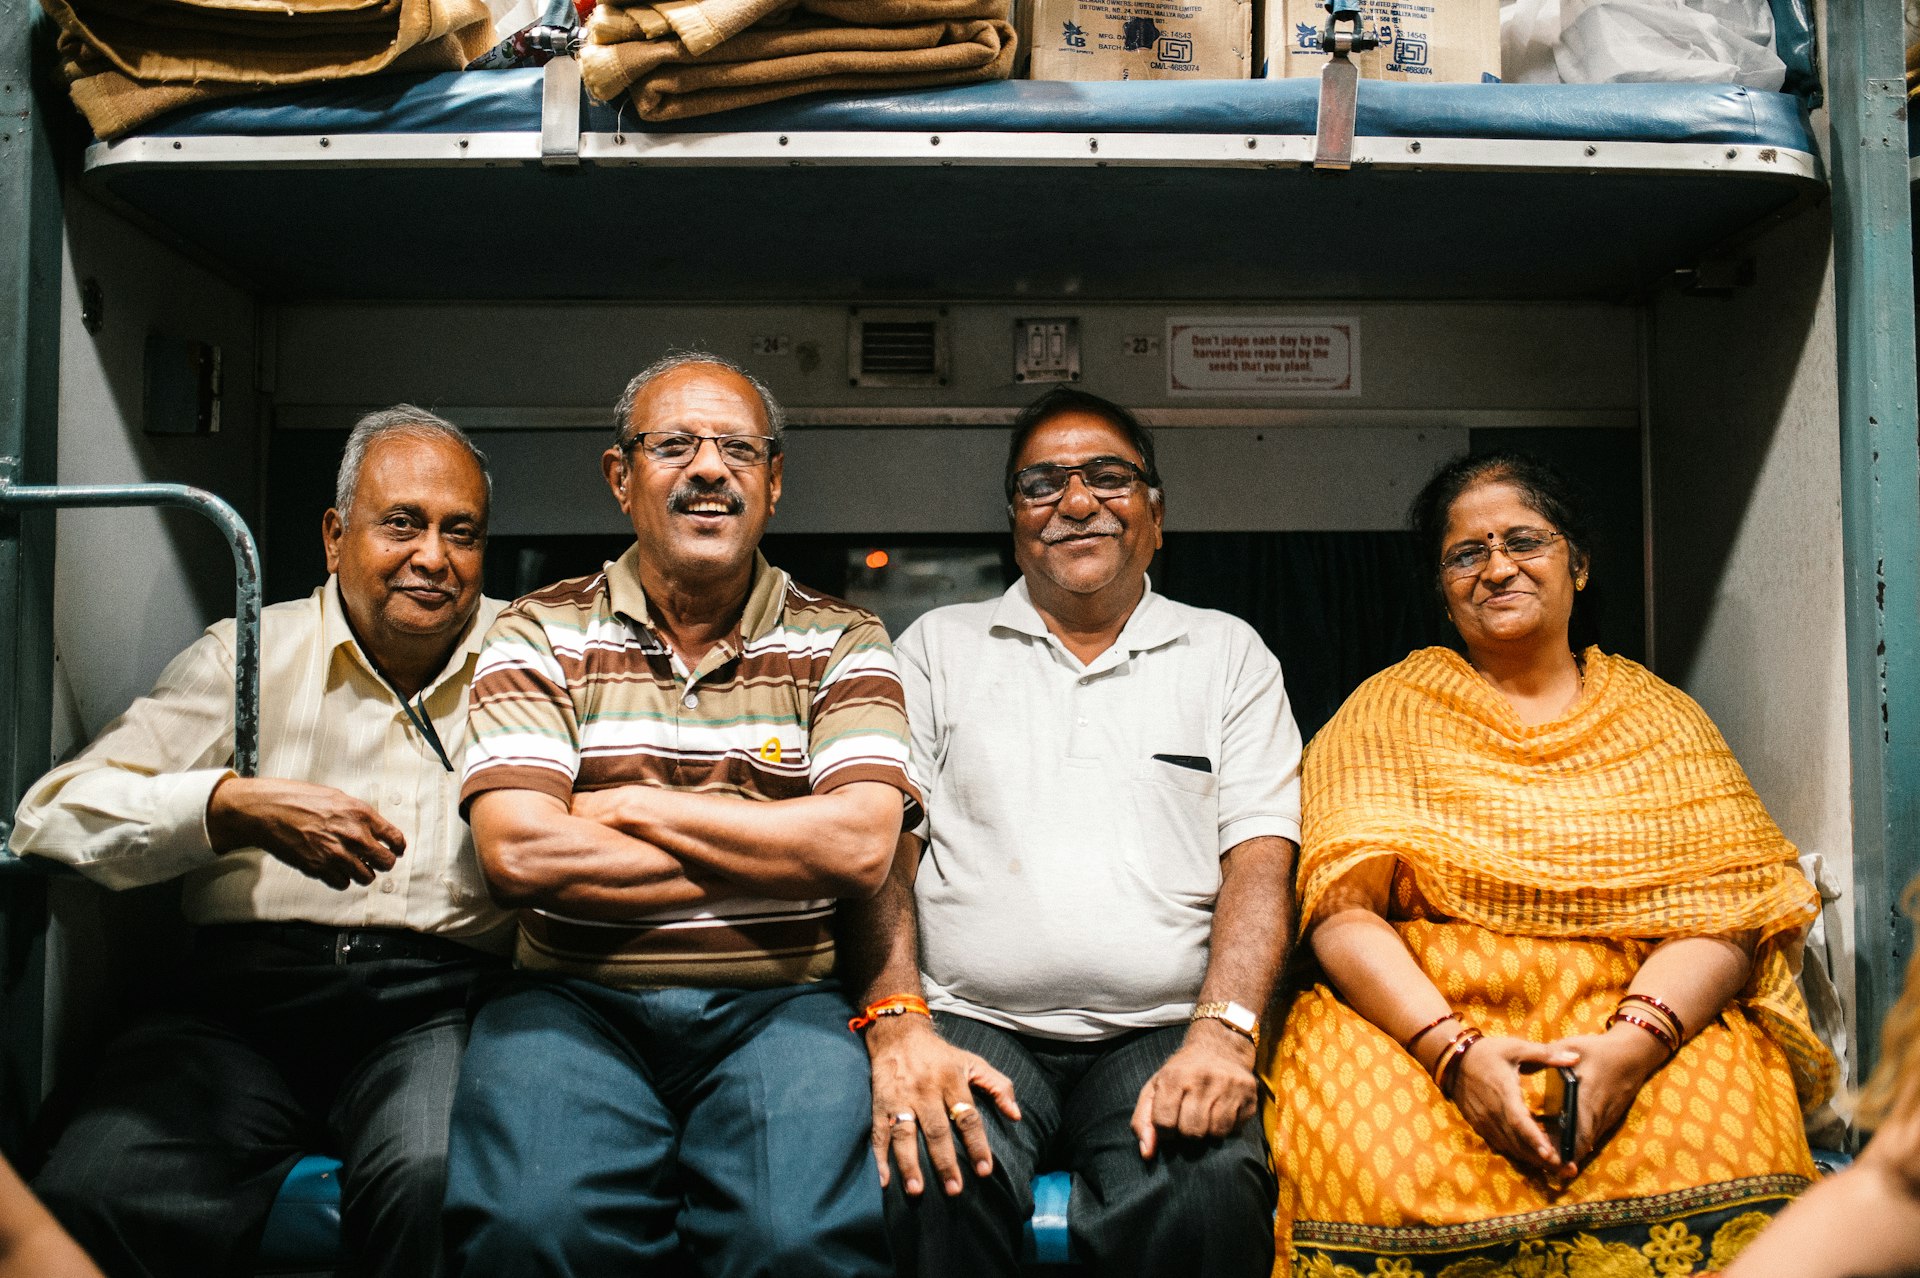 A group of four Indian travelers cram together on a bench on a train and smile at the camera